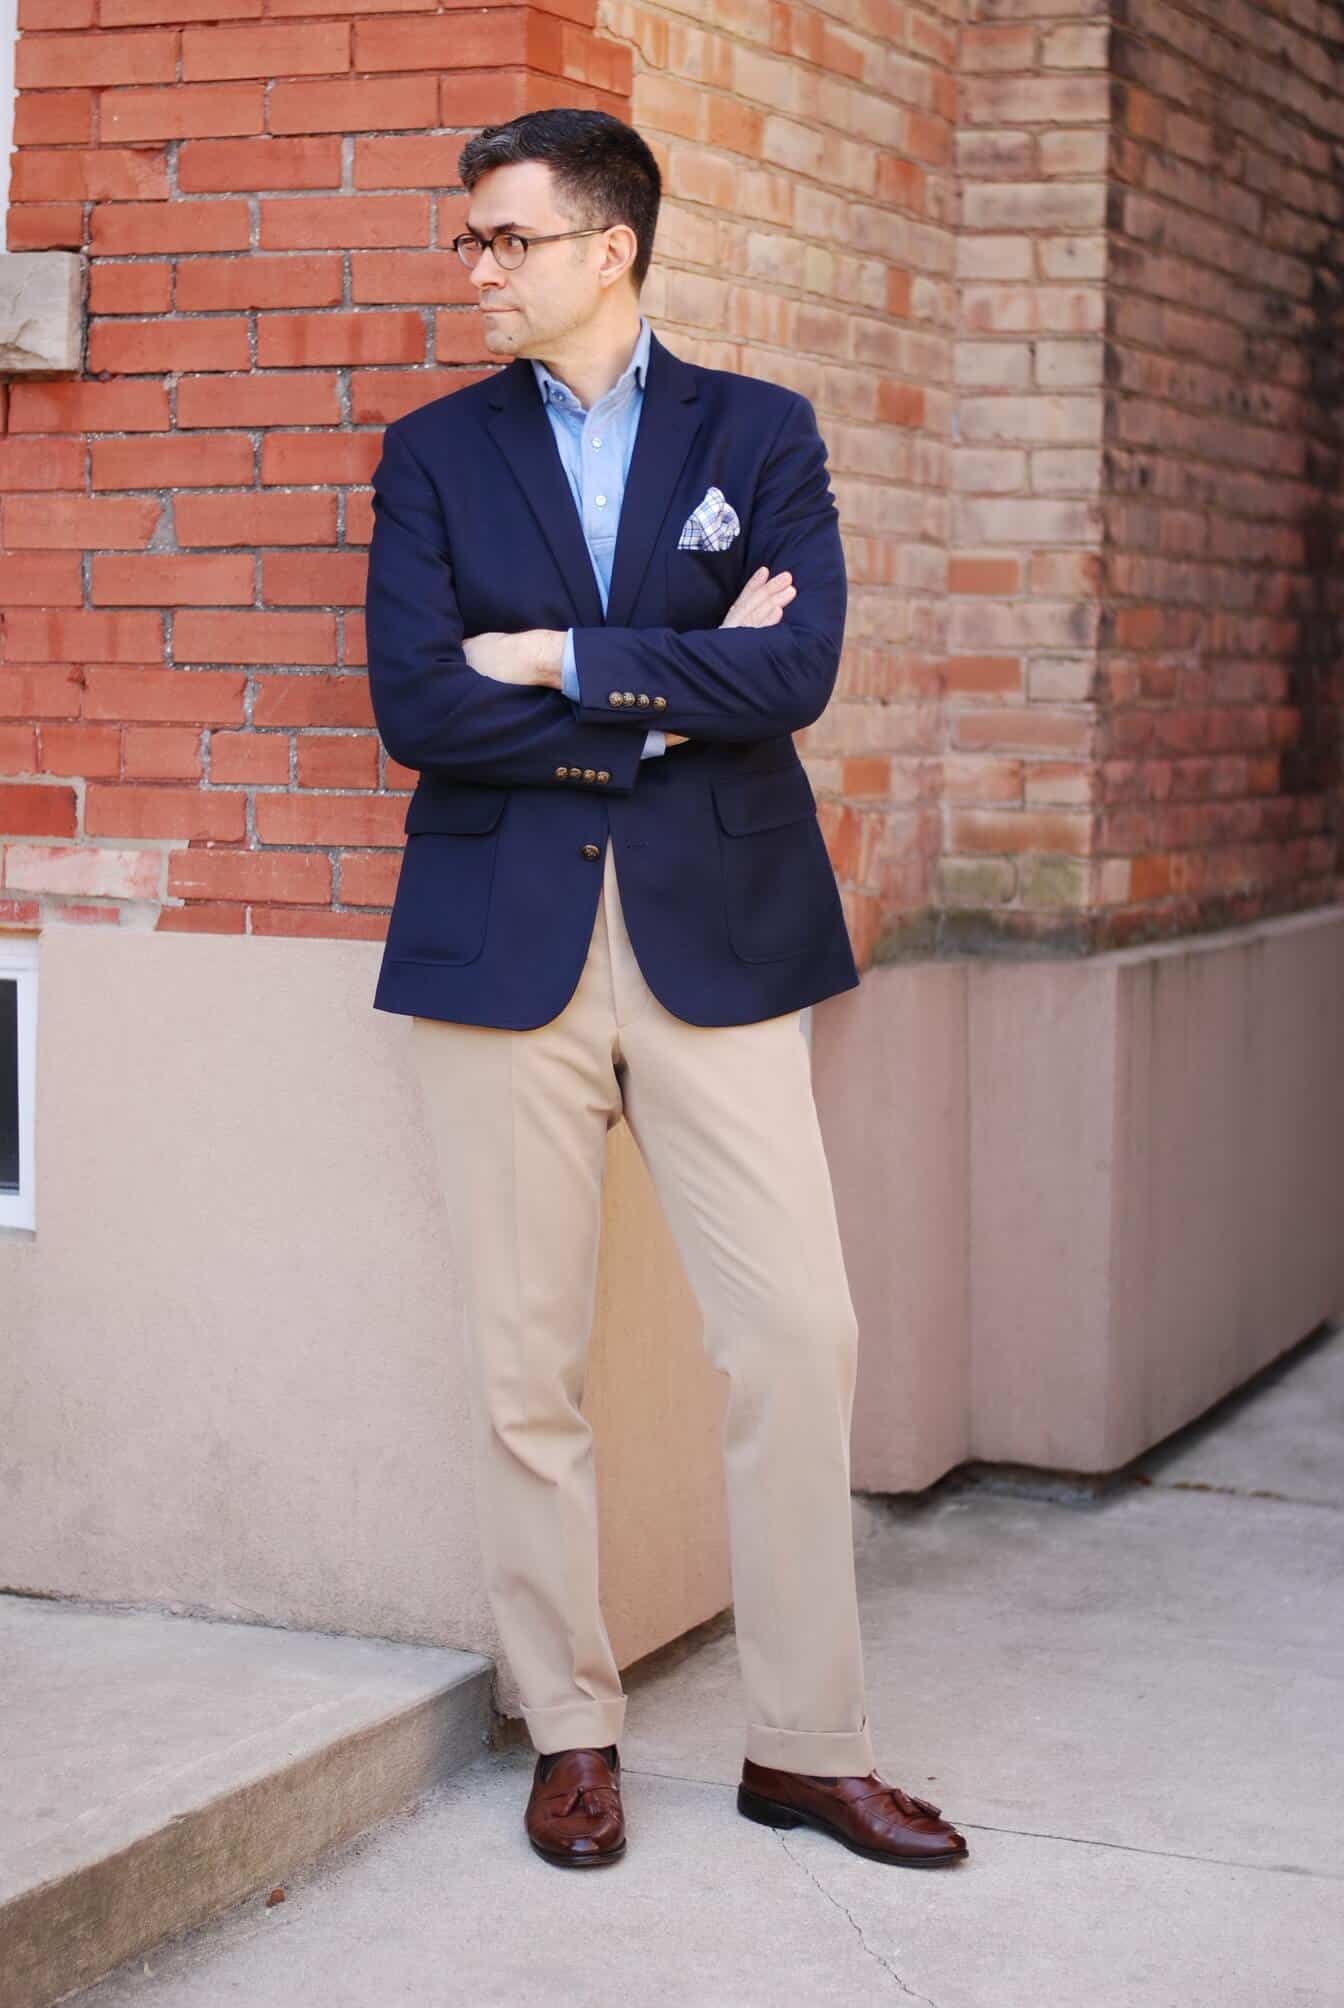 Business Casual Outfit by Hogtownrake - Single Breasted Blazer with popover shirt, cotton pocket square, khakis and brown tassel loafers